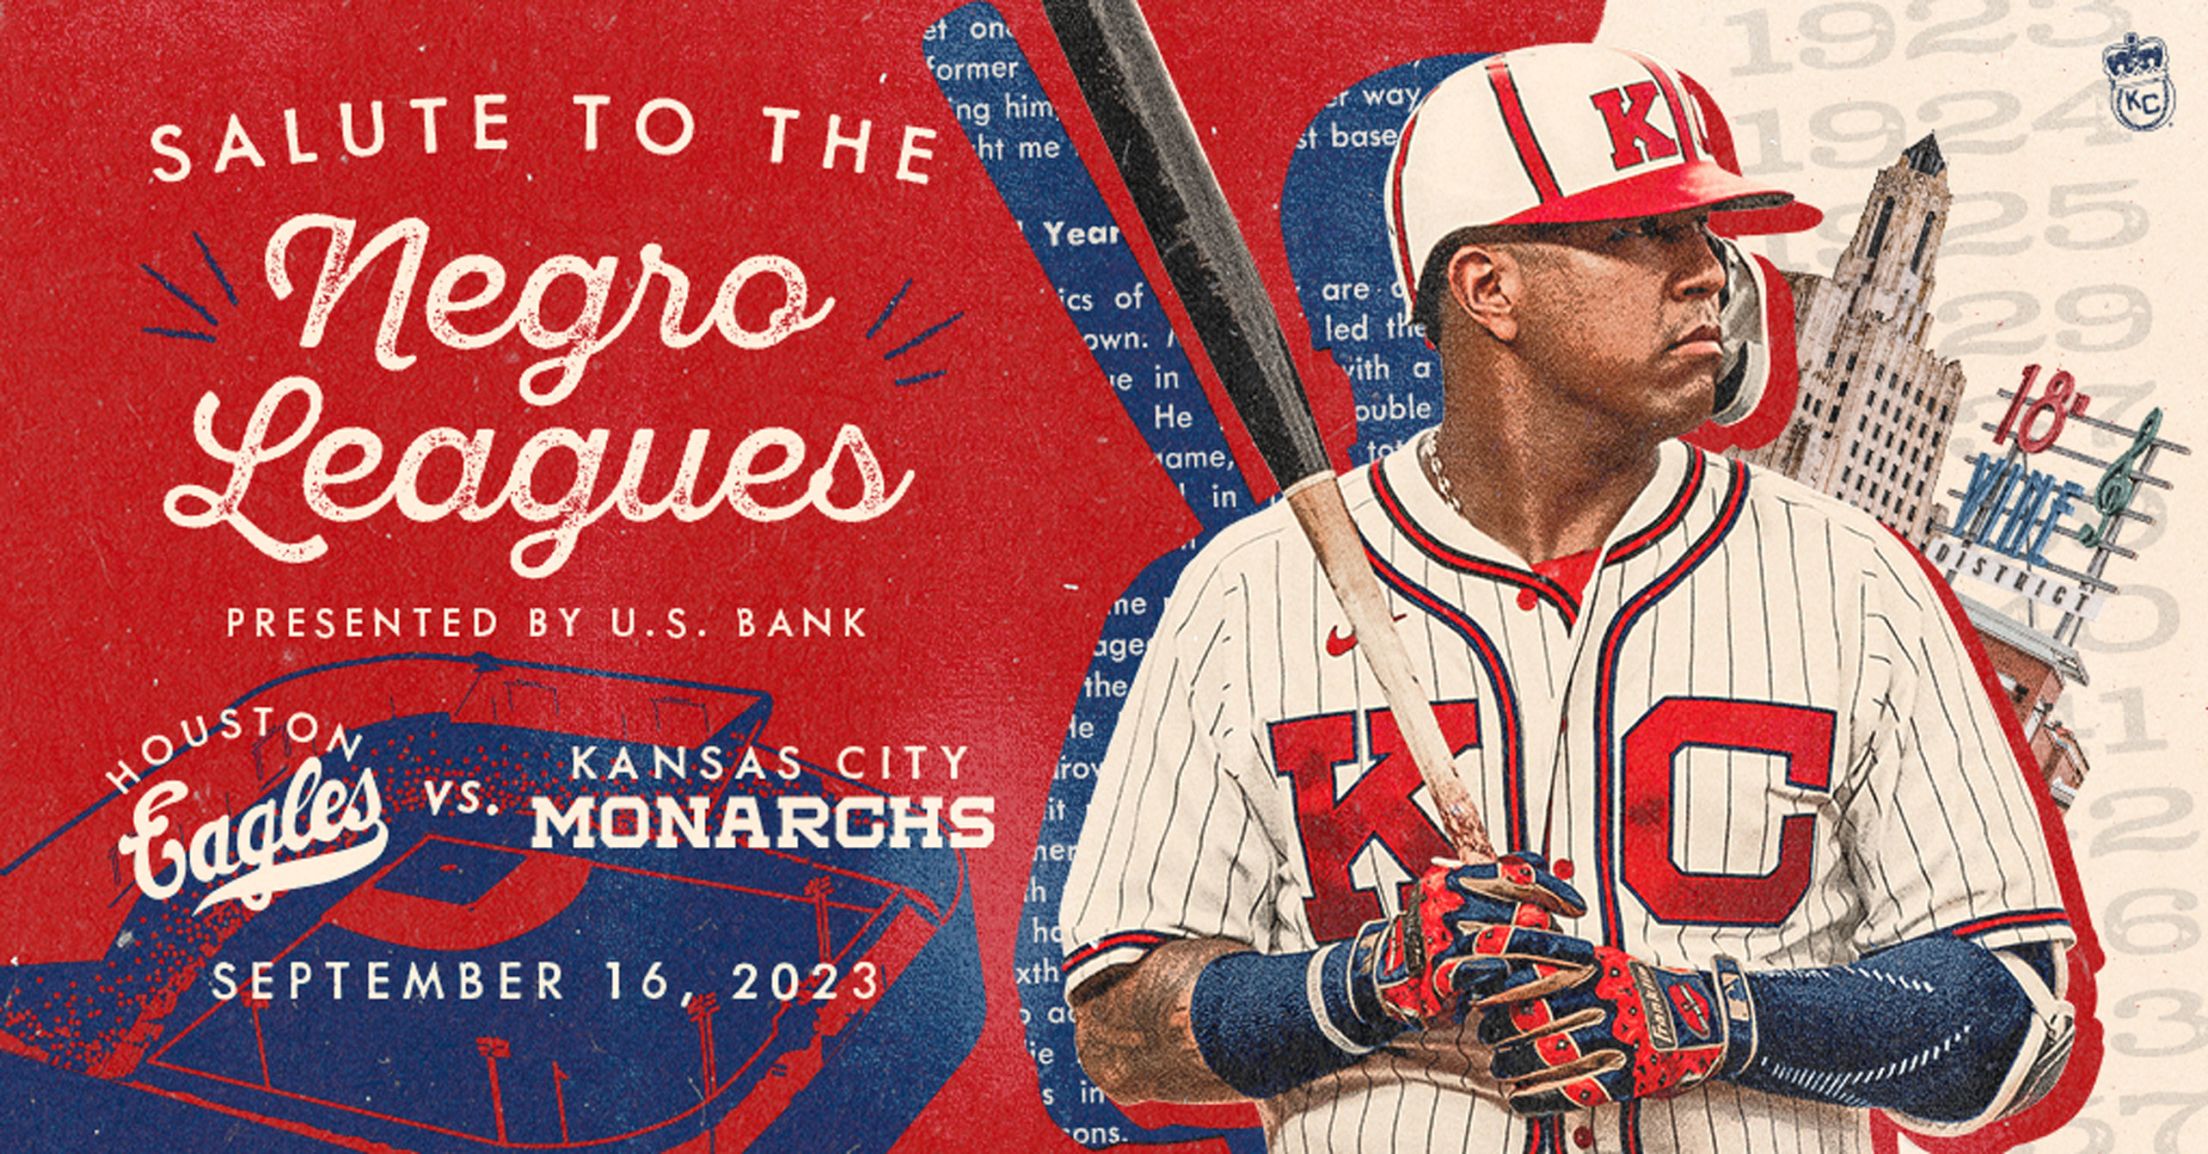 Kansas City uniquely qualified for annual Salute to Negro Leagues